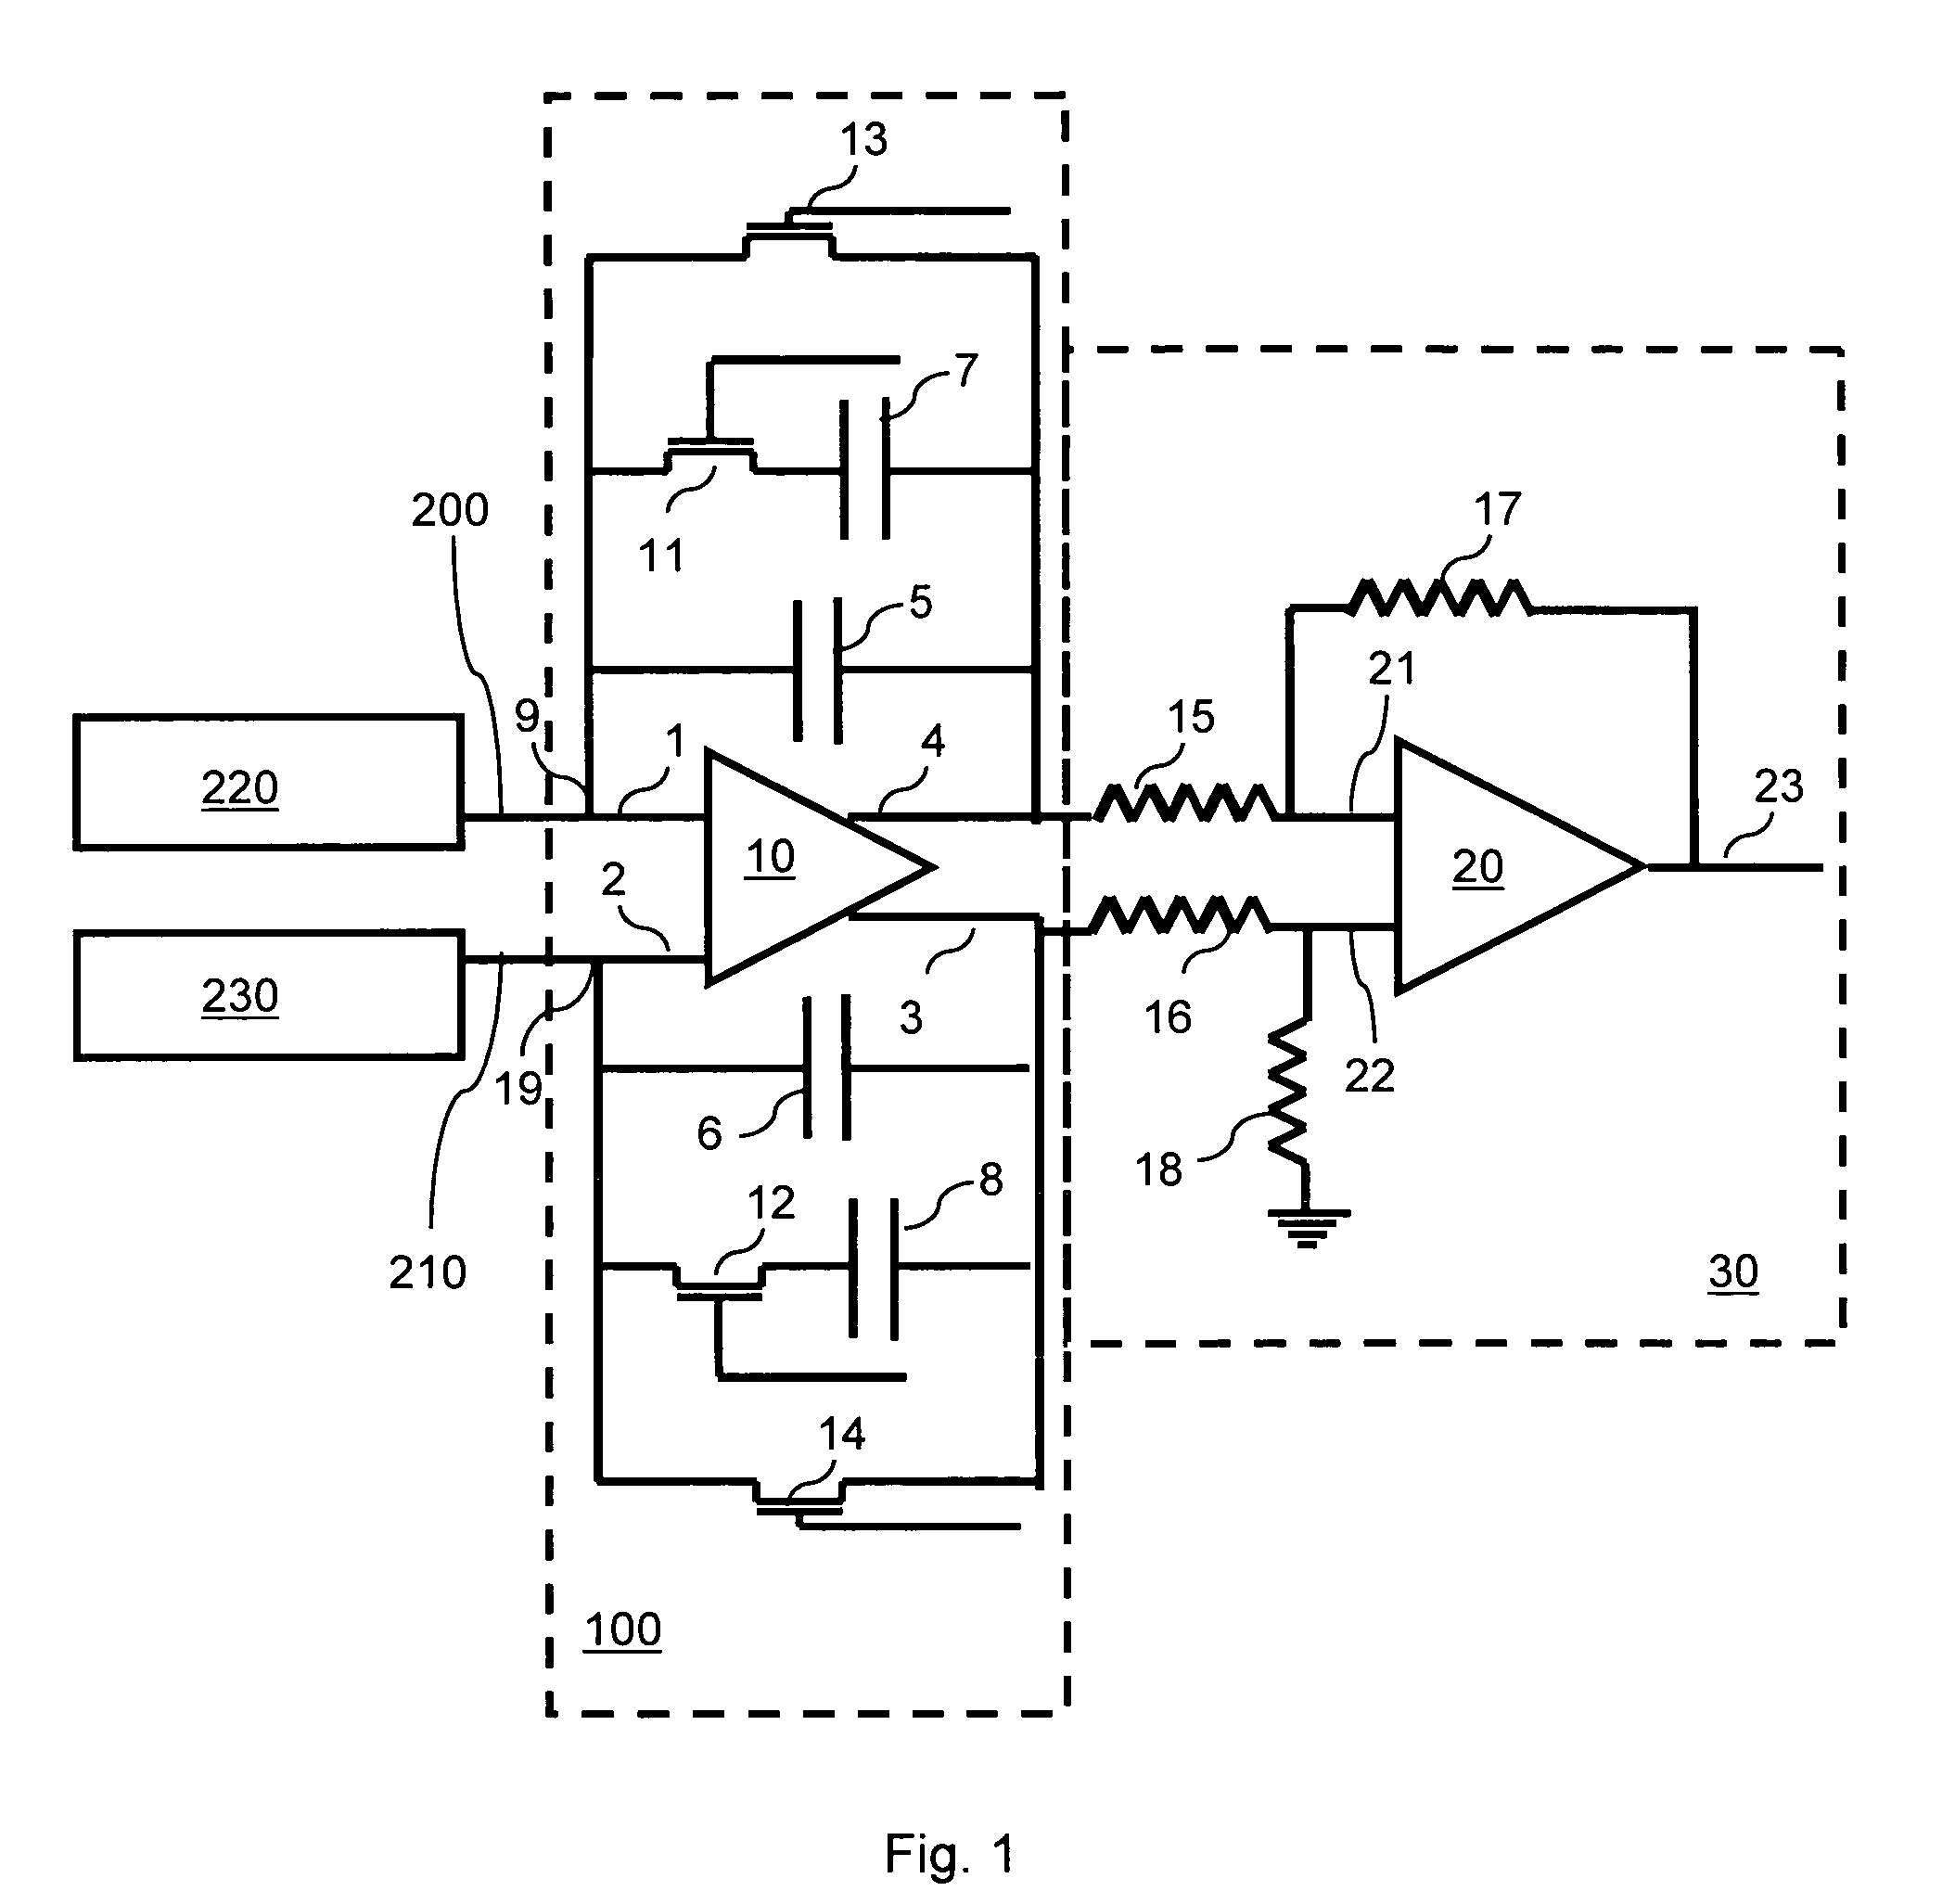 Differential transimpedance amplifier circuit for correlated differential amplification